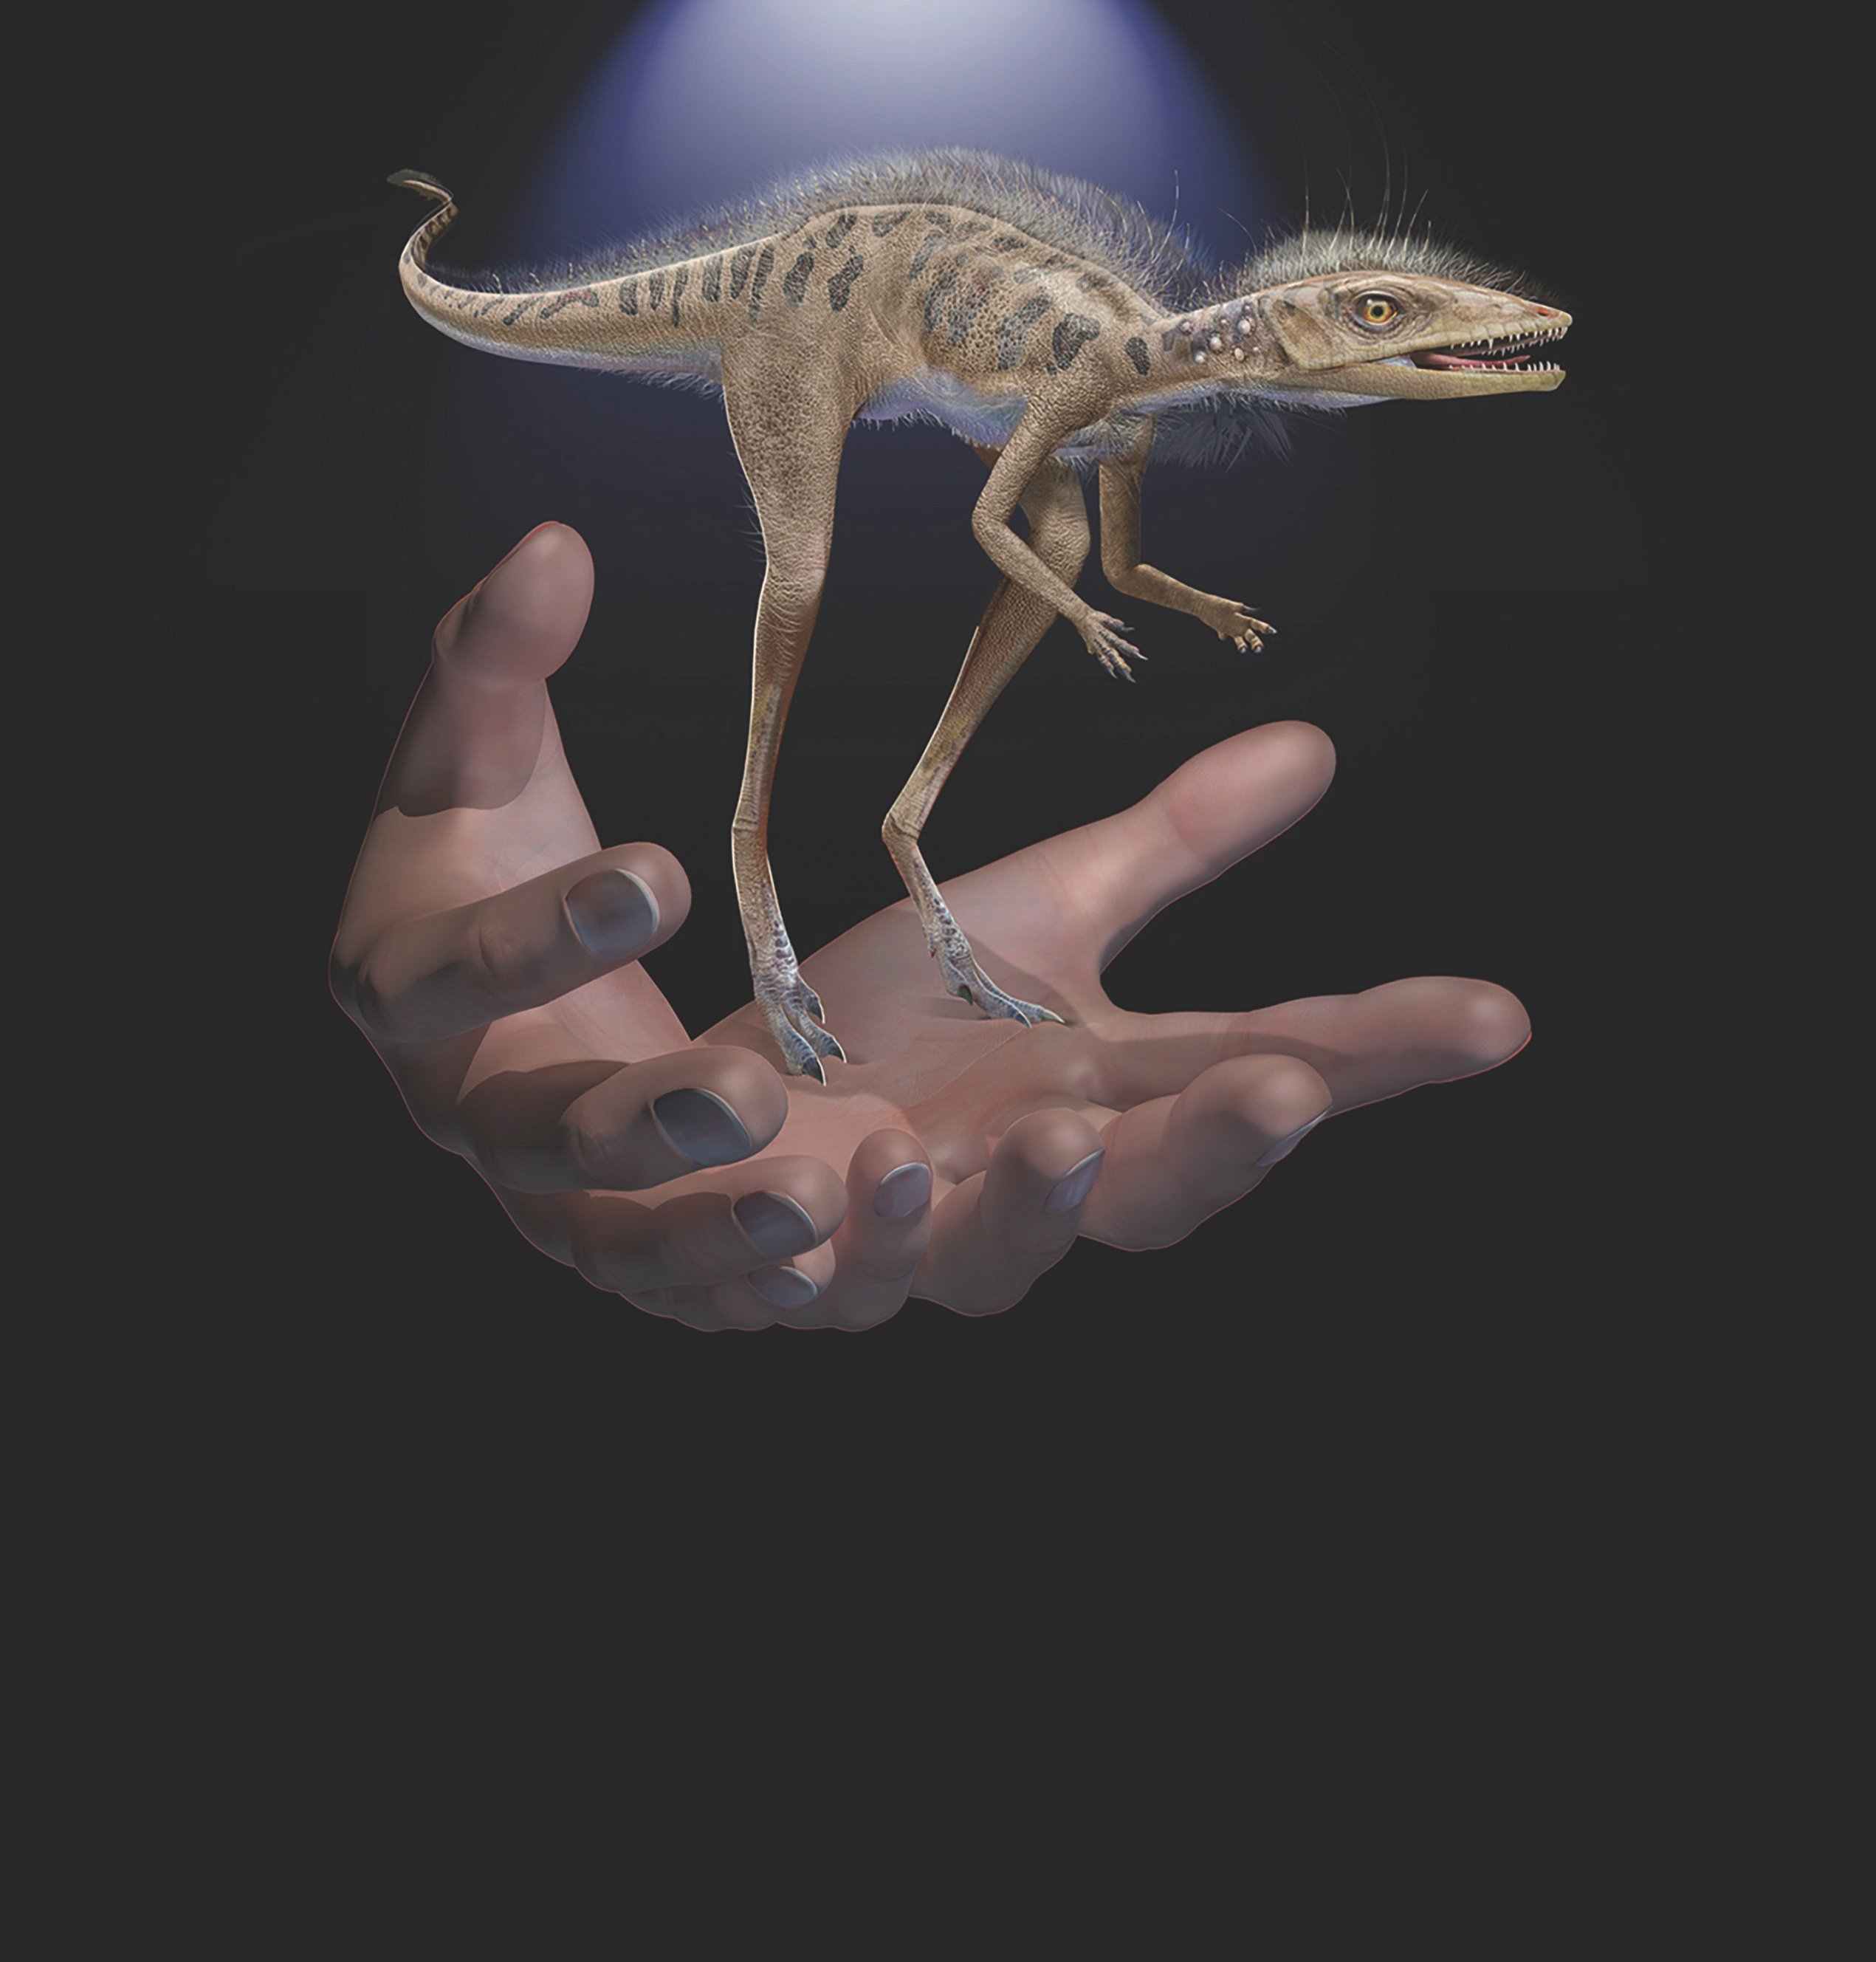 A Kongonaphon kely is shown to scale with human hands in an undated illustration provided on July 6, 2020. (Frank Ippolito/American Museum of Natural History/Handout via REUTERS)